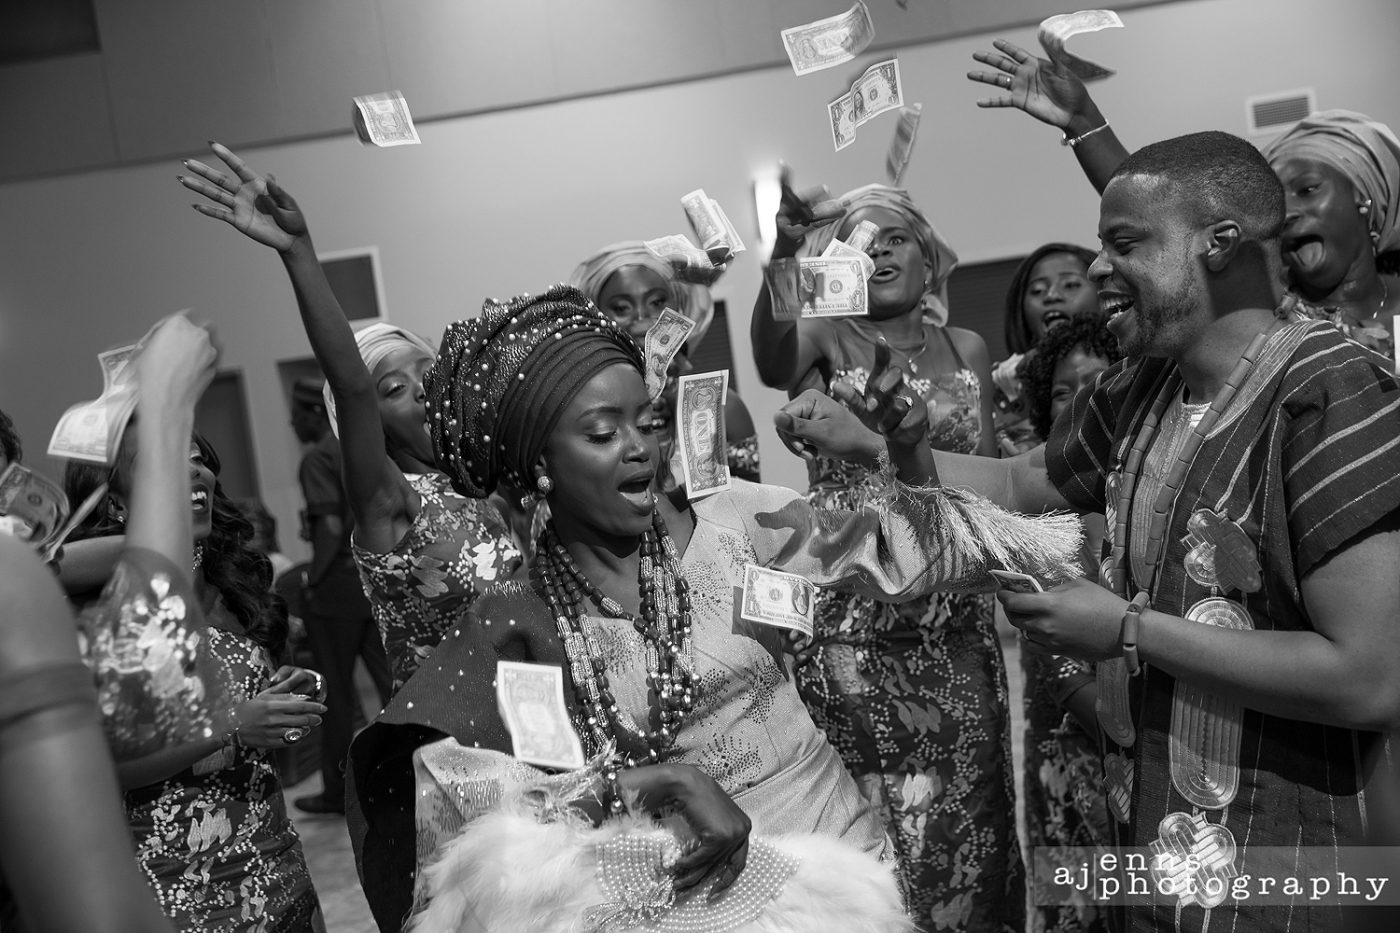 The Kenyan culture showers the couple with money as a wedding gift